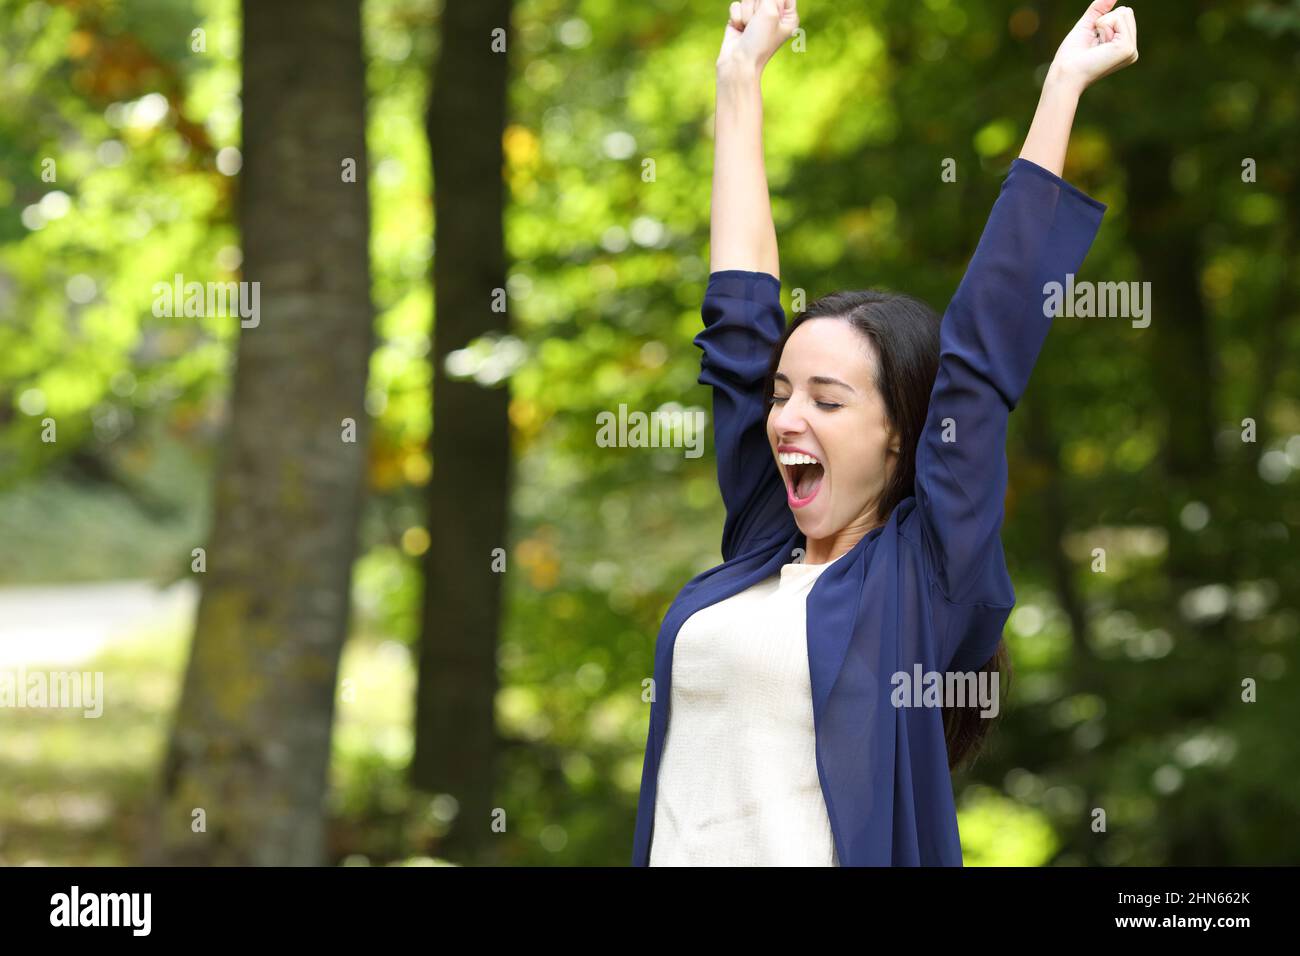 Excited woman in a park raising arms celebrating success Stock Photo